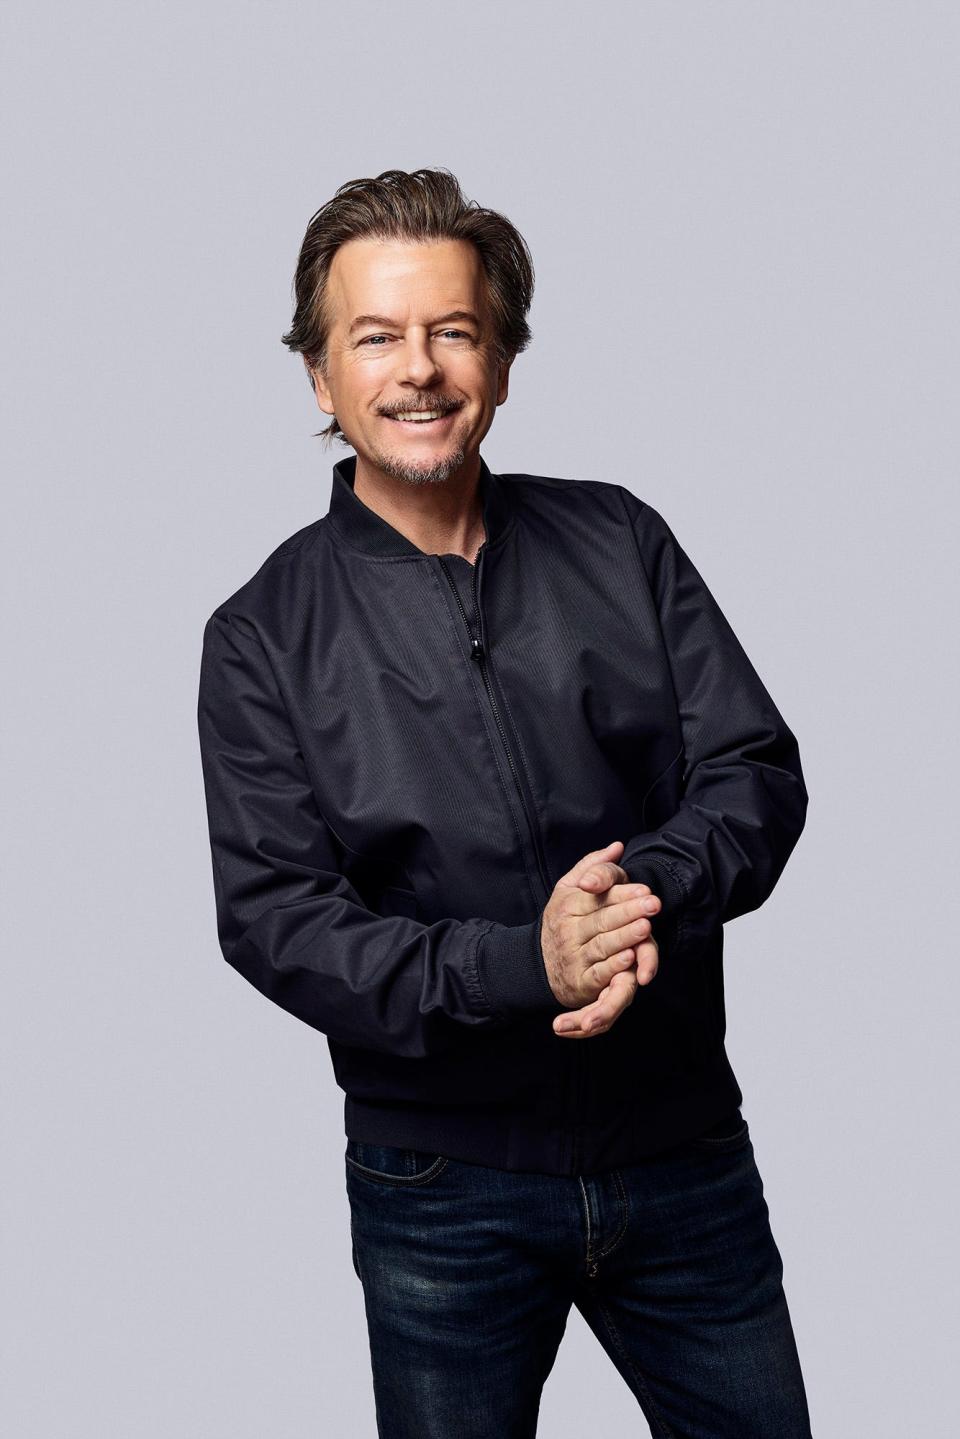 SNAKE OIL:  Host and Producer David Spade.  SNAKE OIL is set to debut in the 2023-2024 season on FOX.  ©2023 .